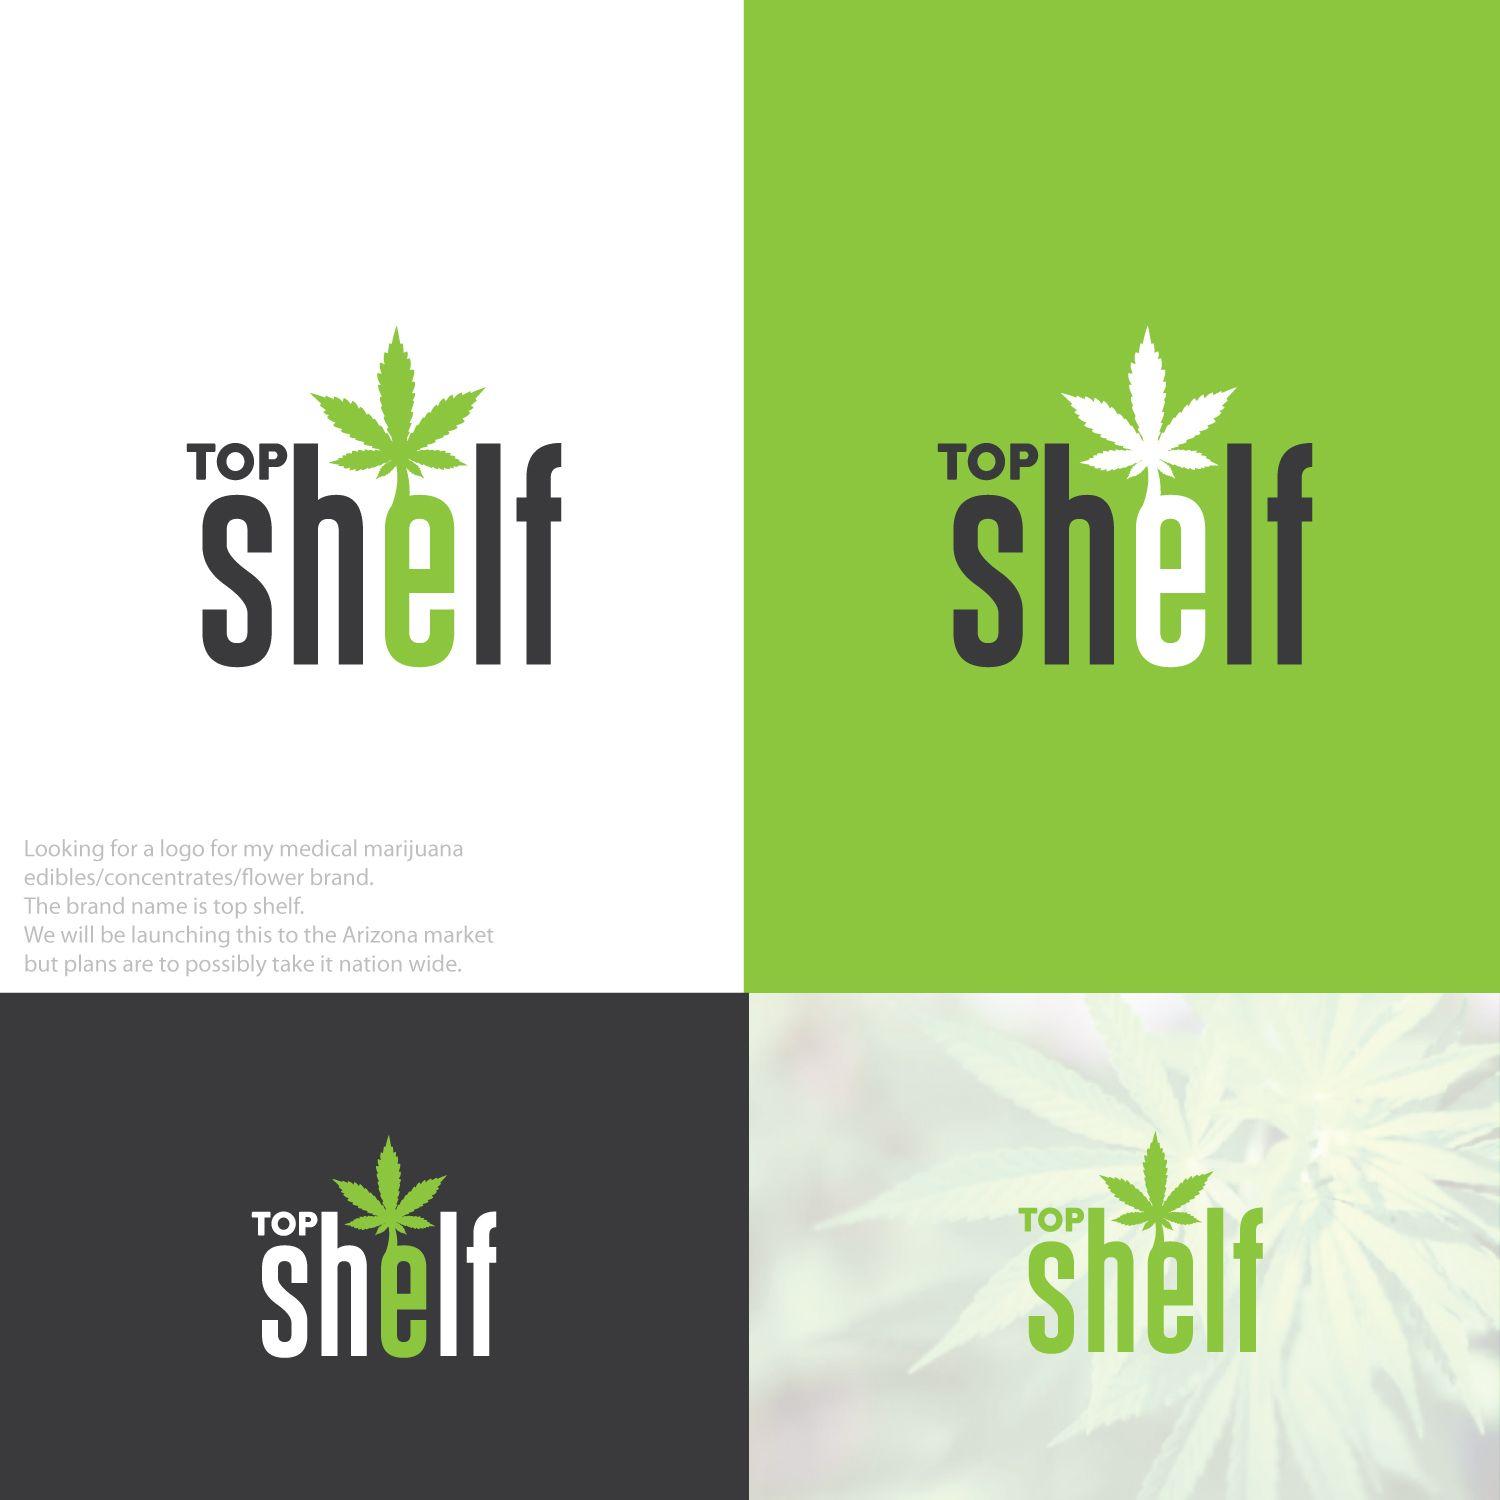 Top Green Logo - 45 Marijuana and Weed Logo Designs for Branding Your Cannabis Business